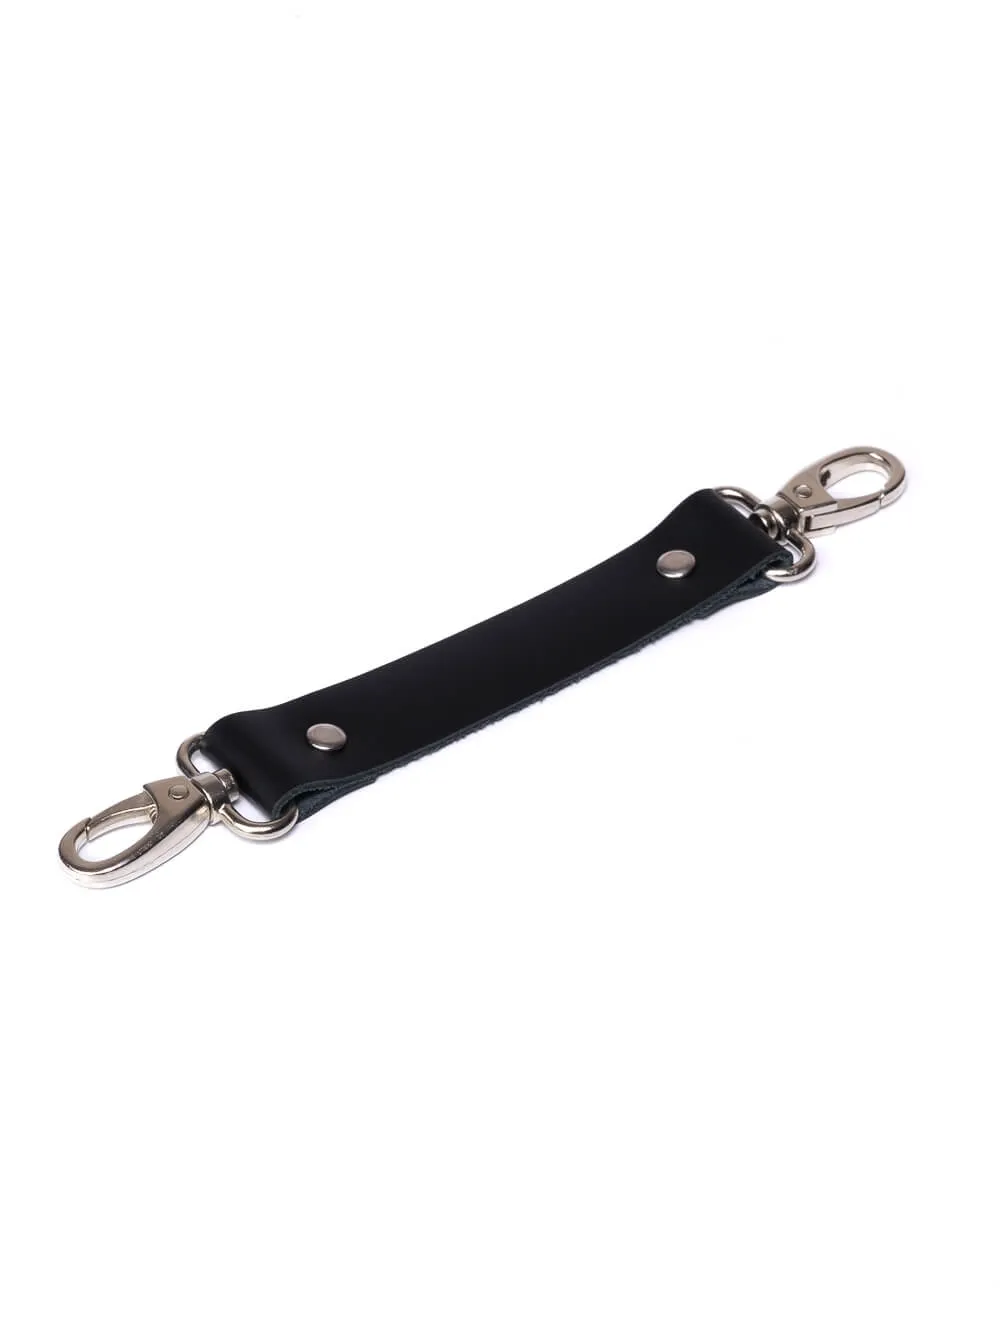 Leather strap connected with two carabiners. Clamp for tying and tightening BDSM and bondage sets.